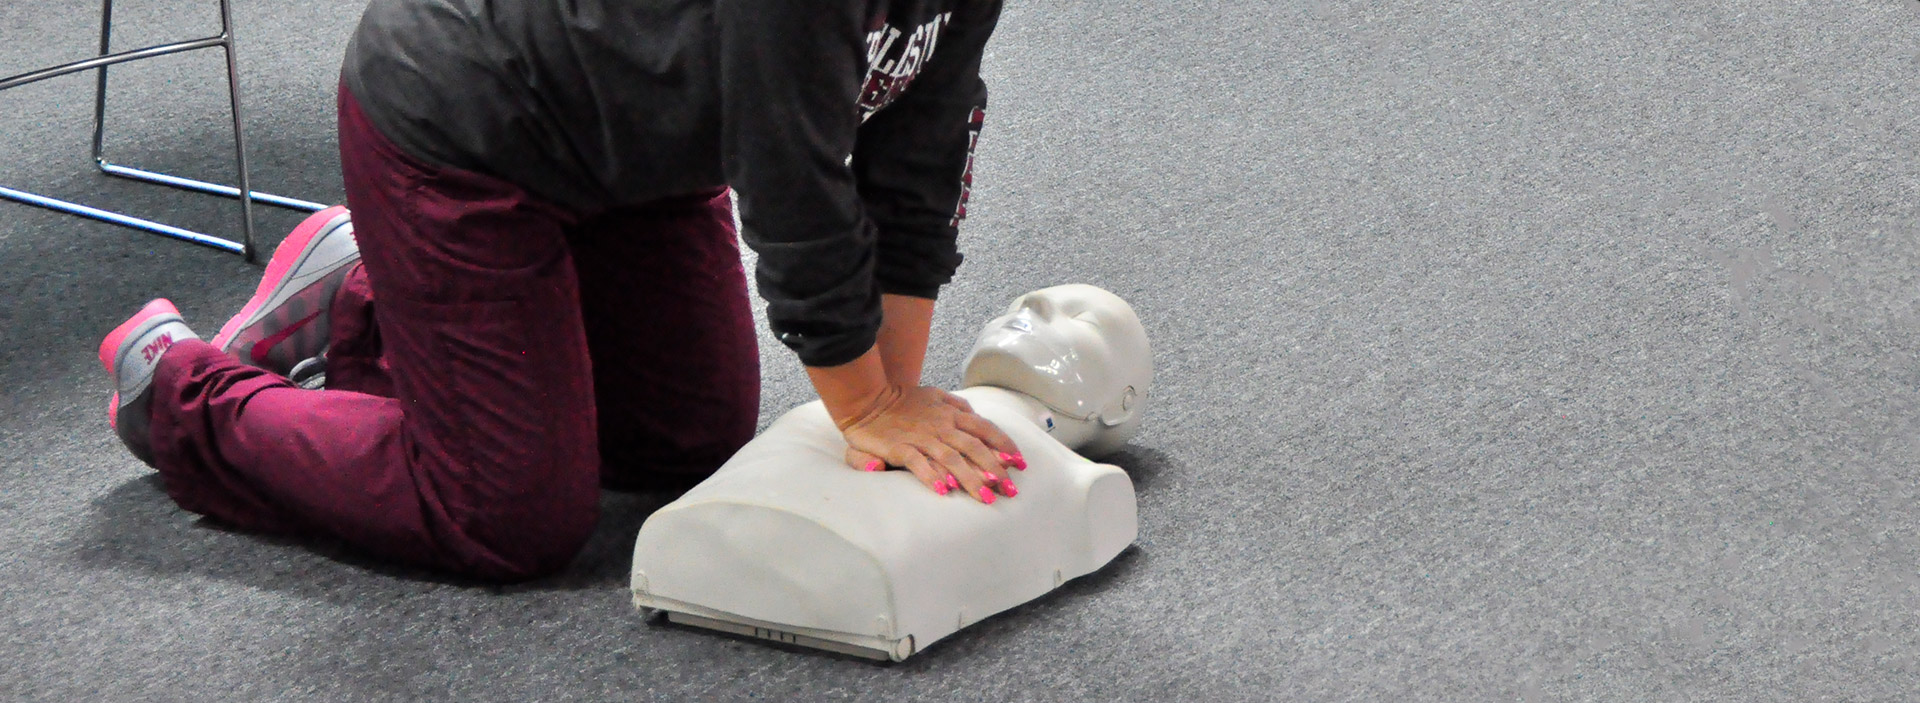 CPR for Healthcare Providers